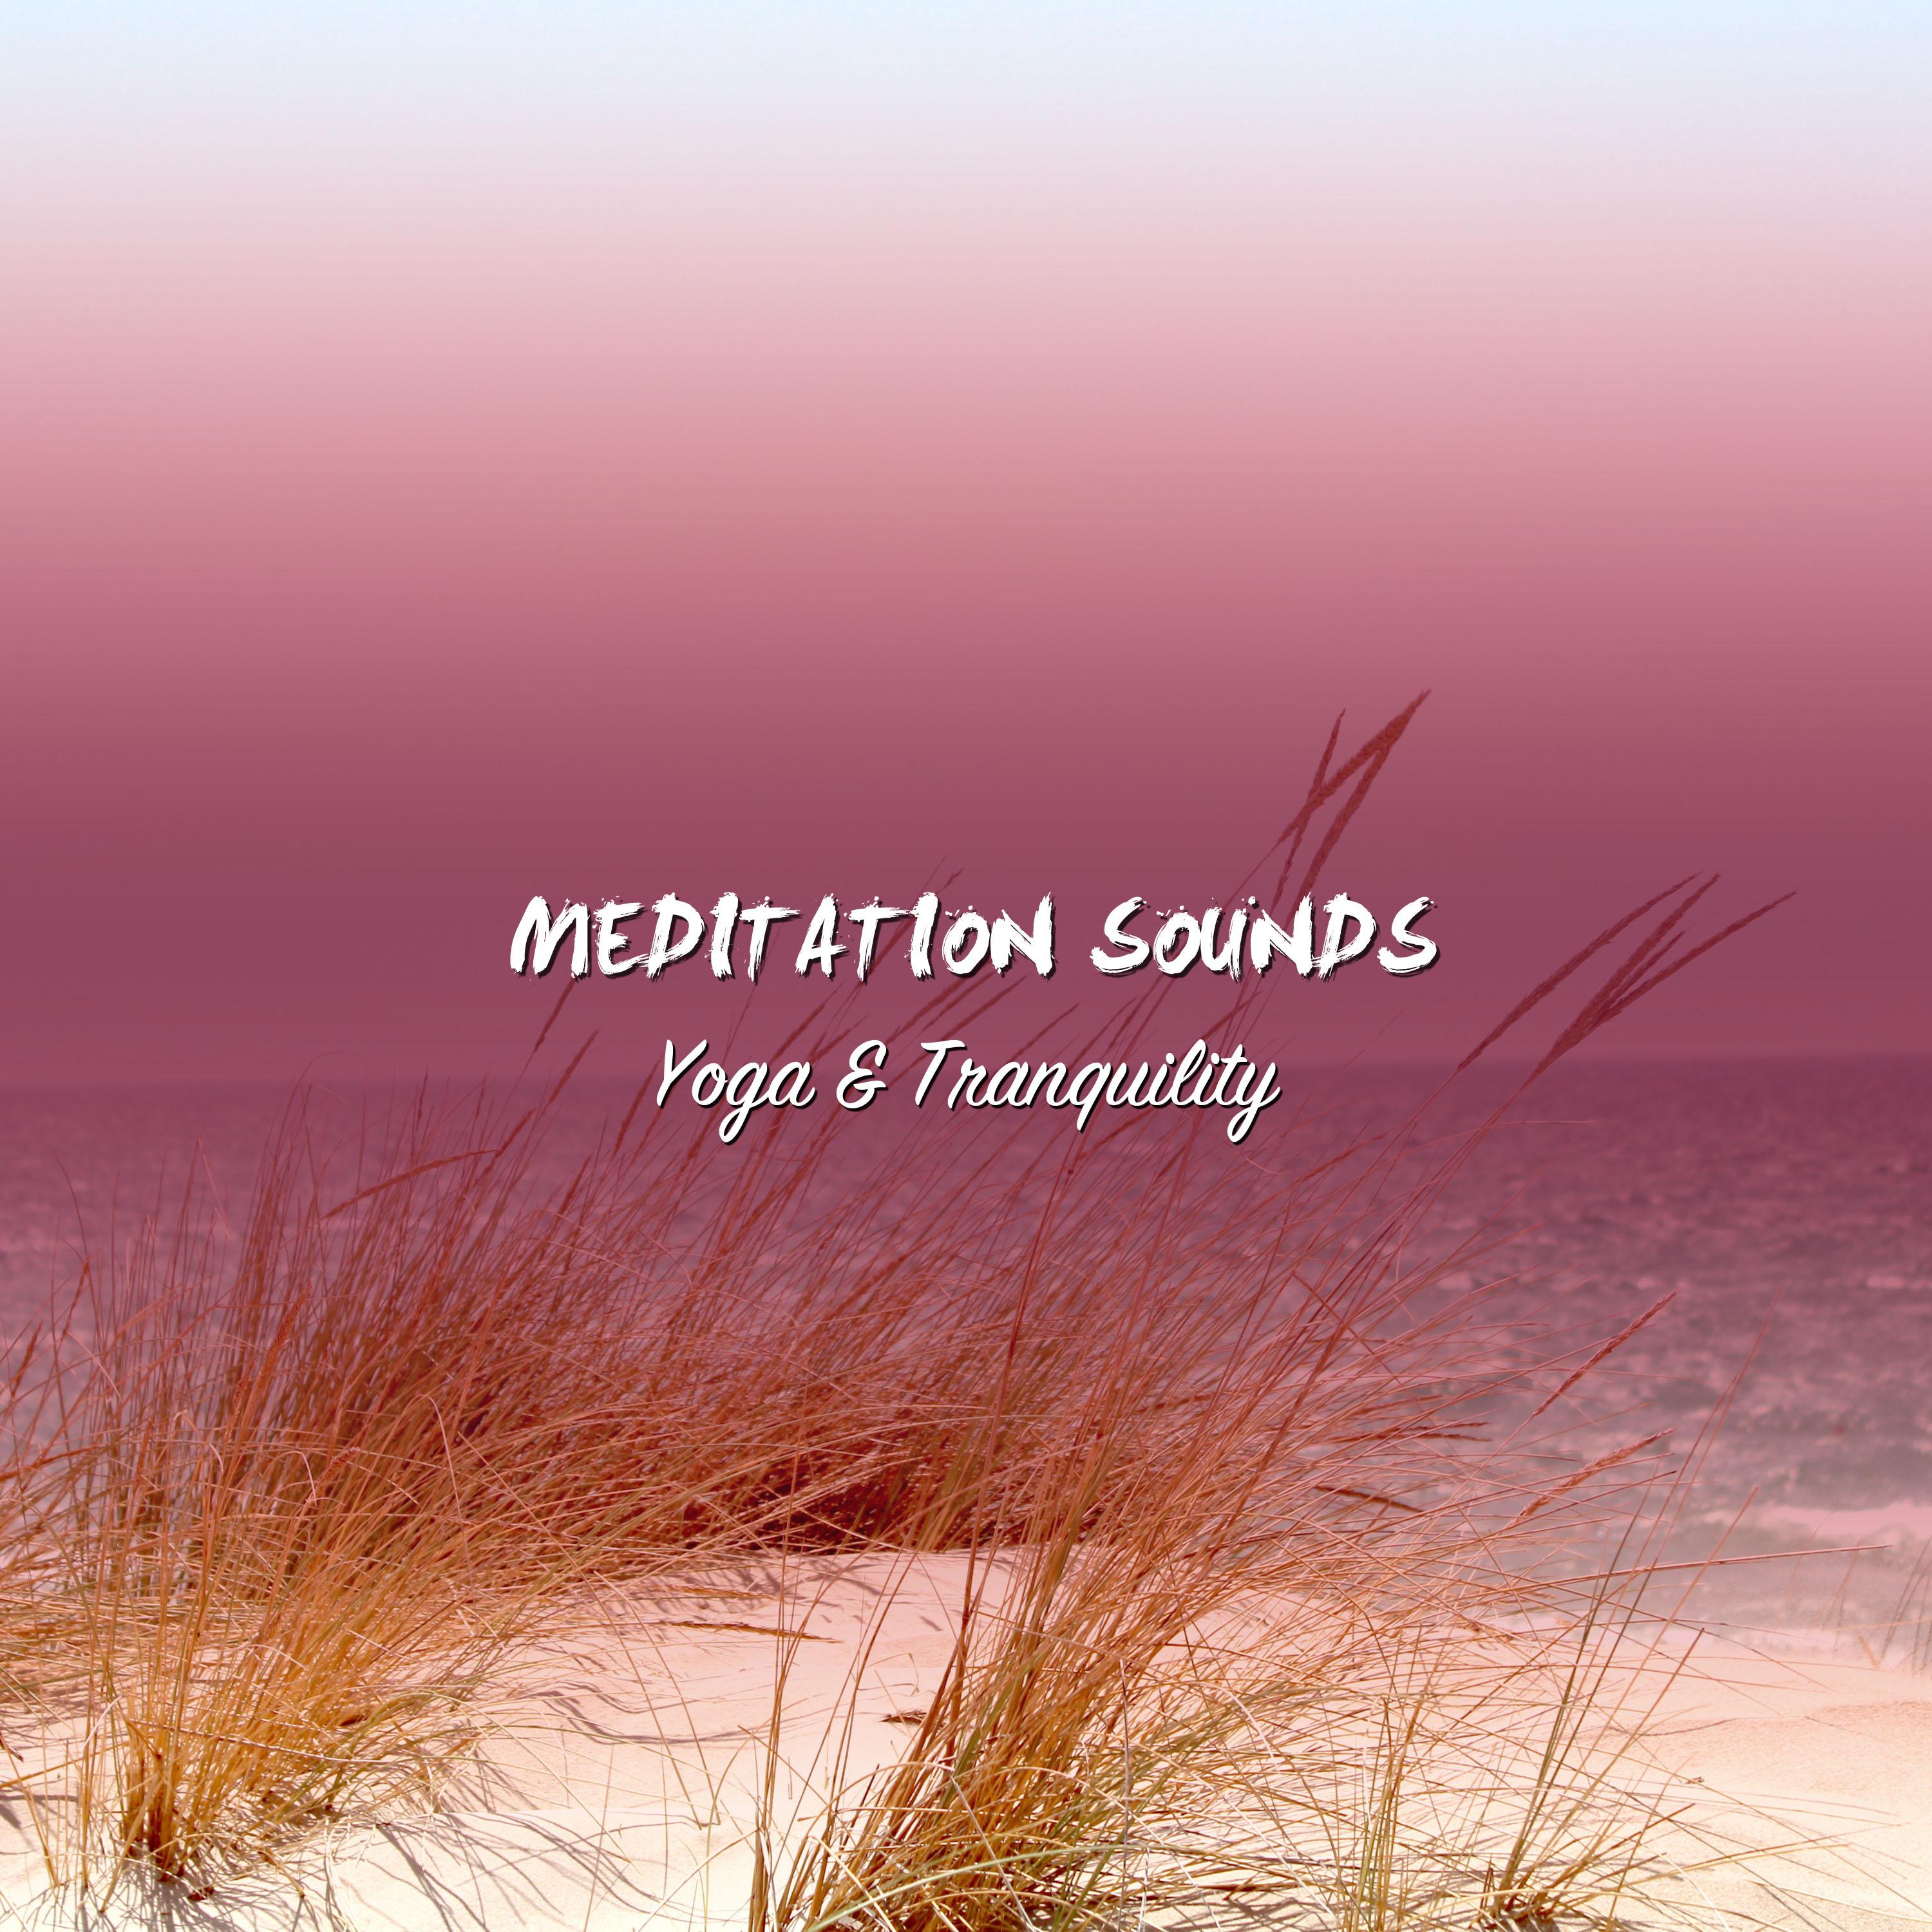 11 Meditation Sounds for Yoga and Tranquility